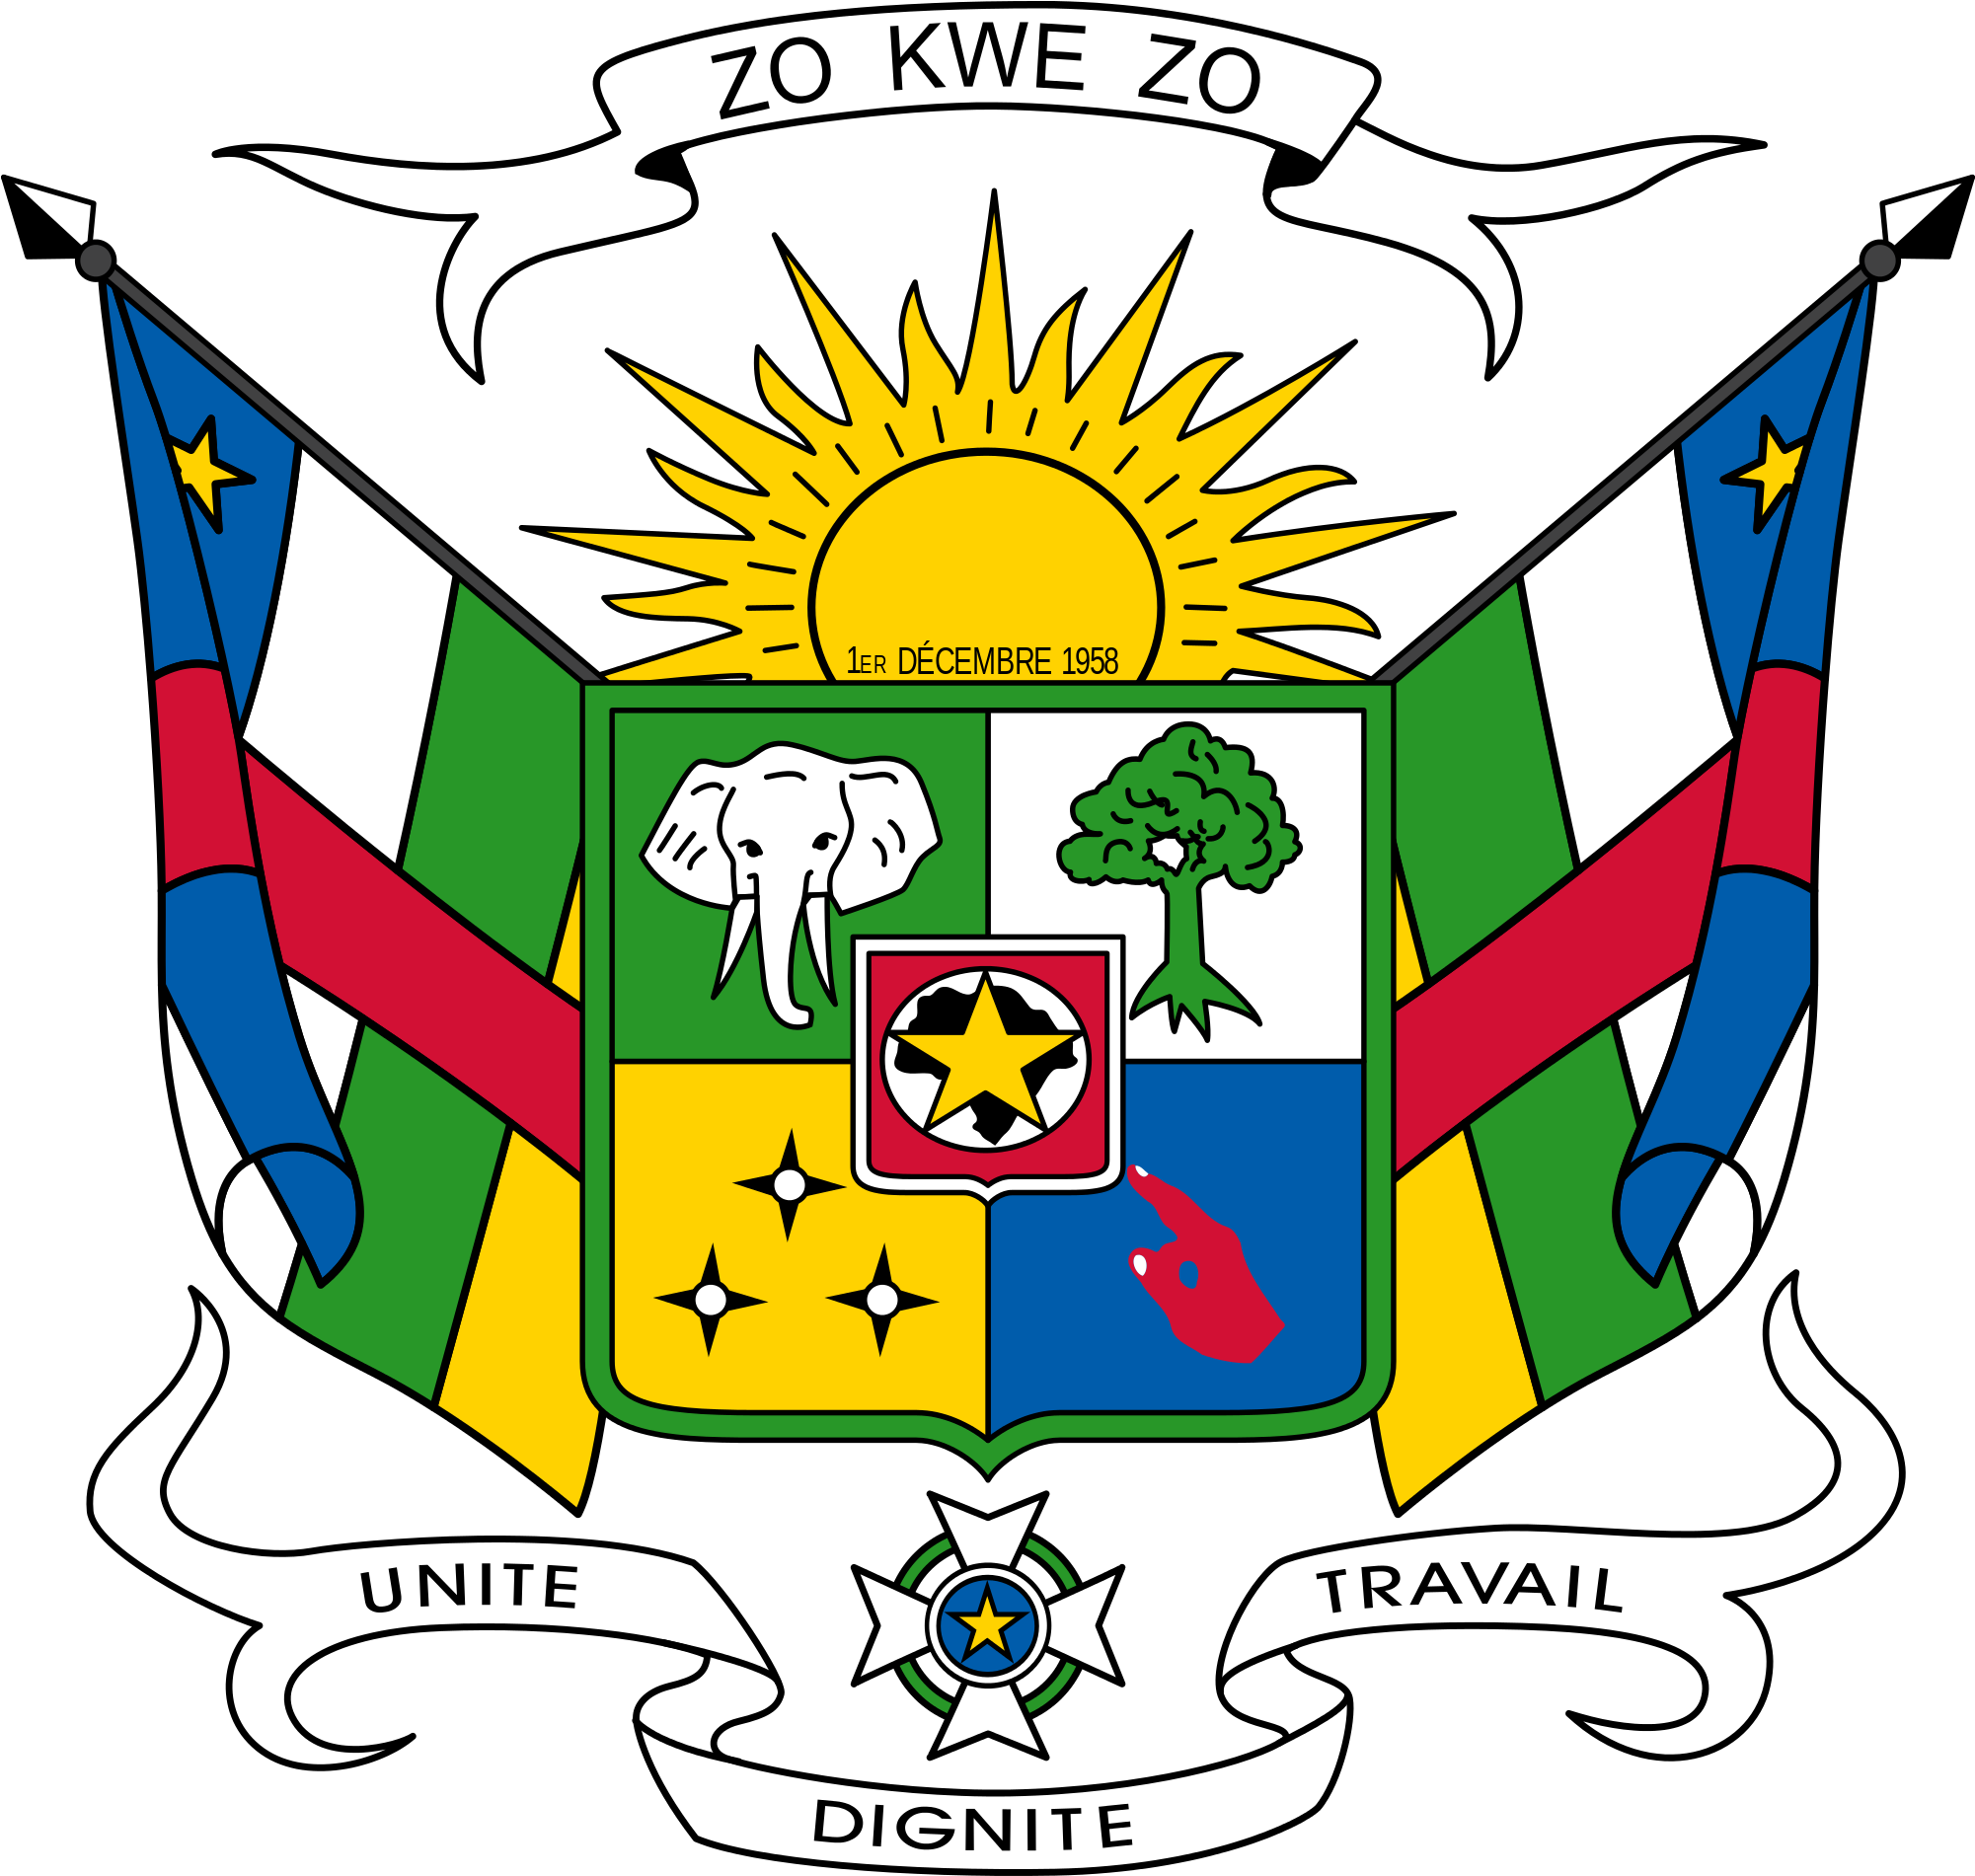 Explore African Beauty, Coat Of Arms, And More - Central African Republic Government (2000x2000)